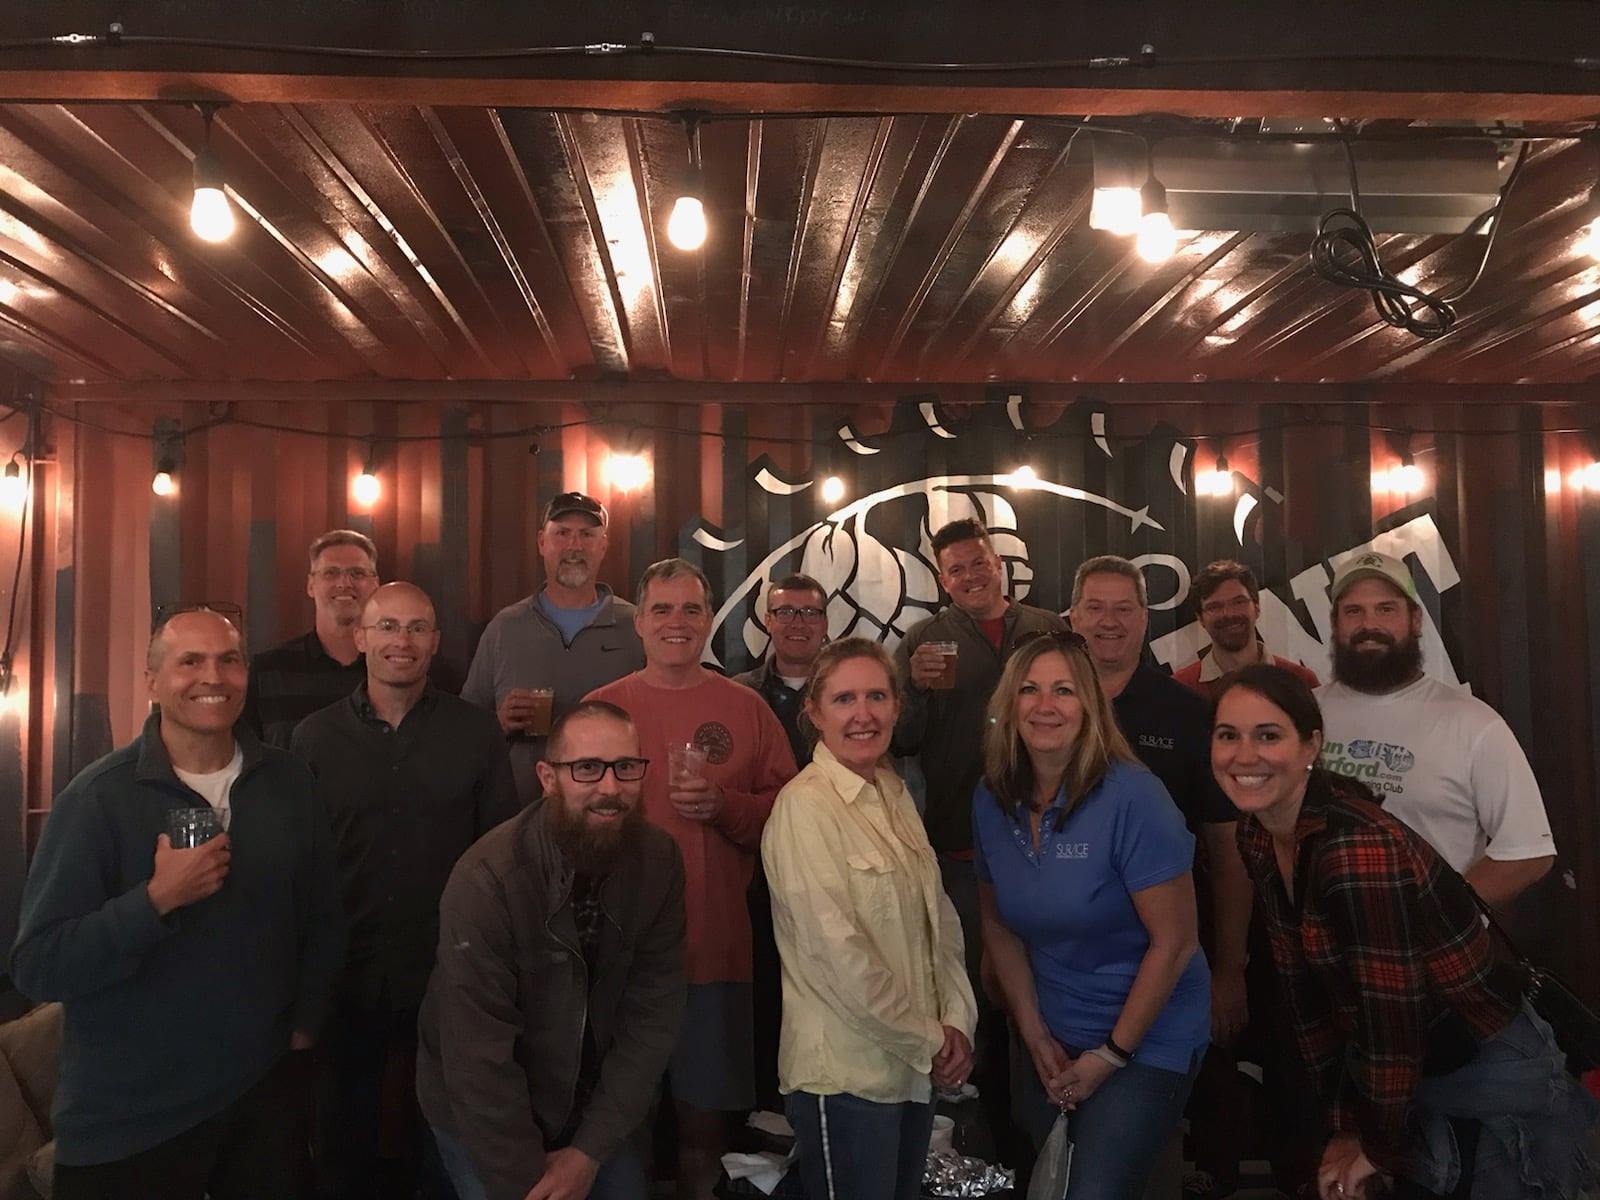 Group shot of SURVICE employees at Independent Brewing Company